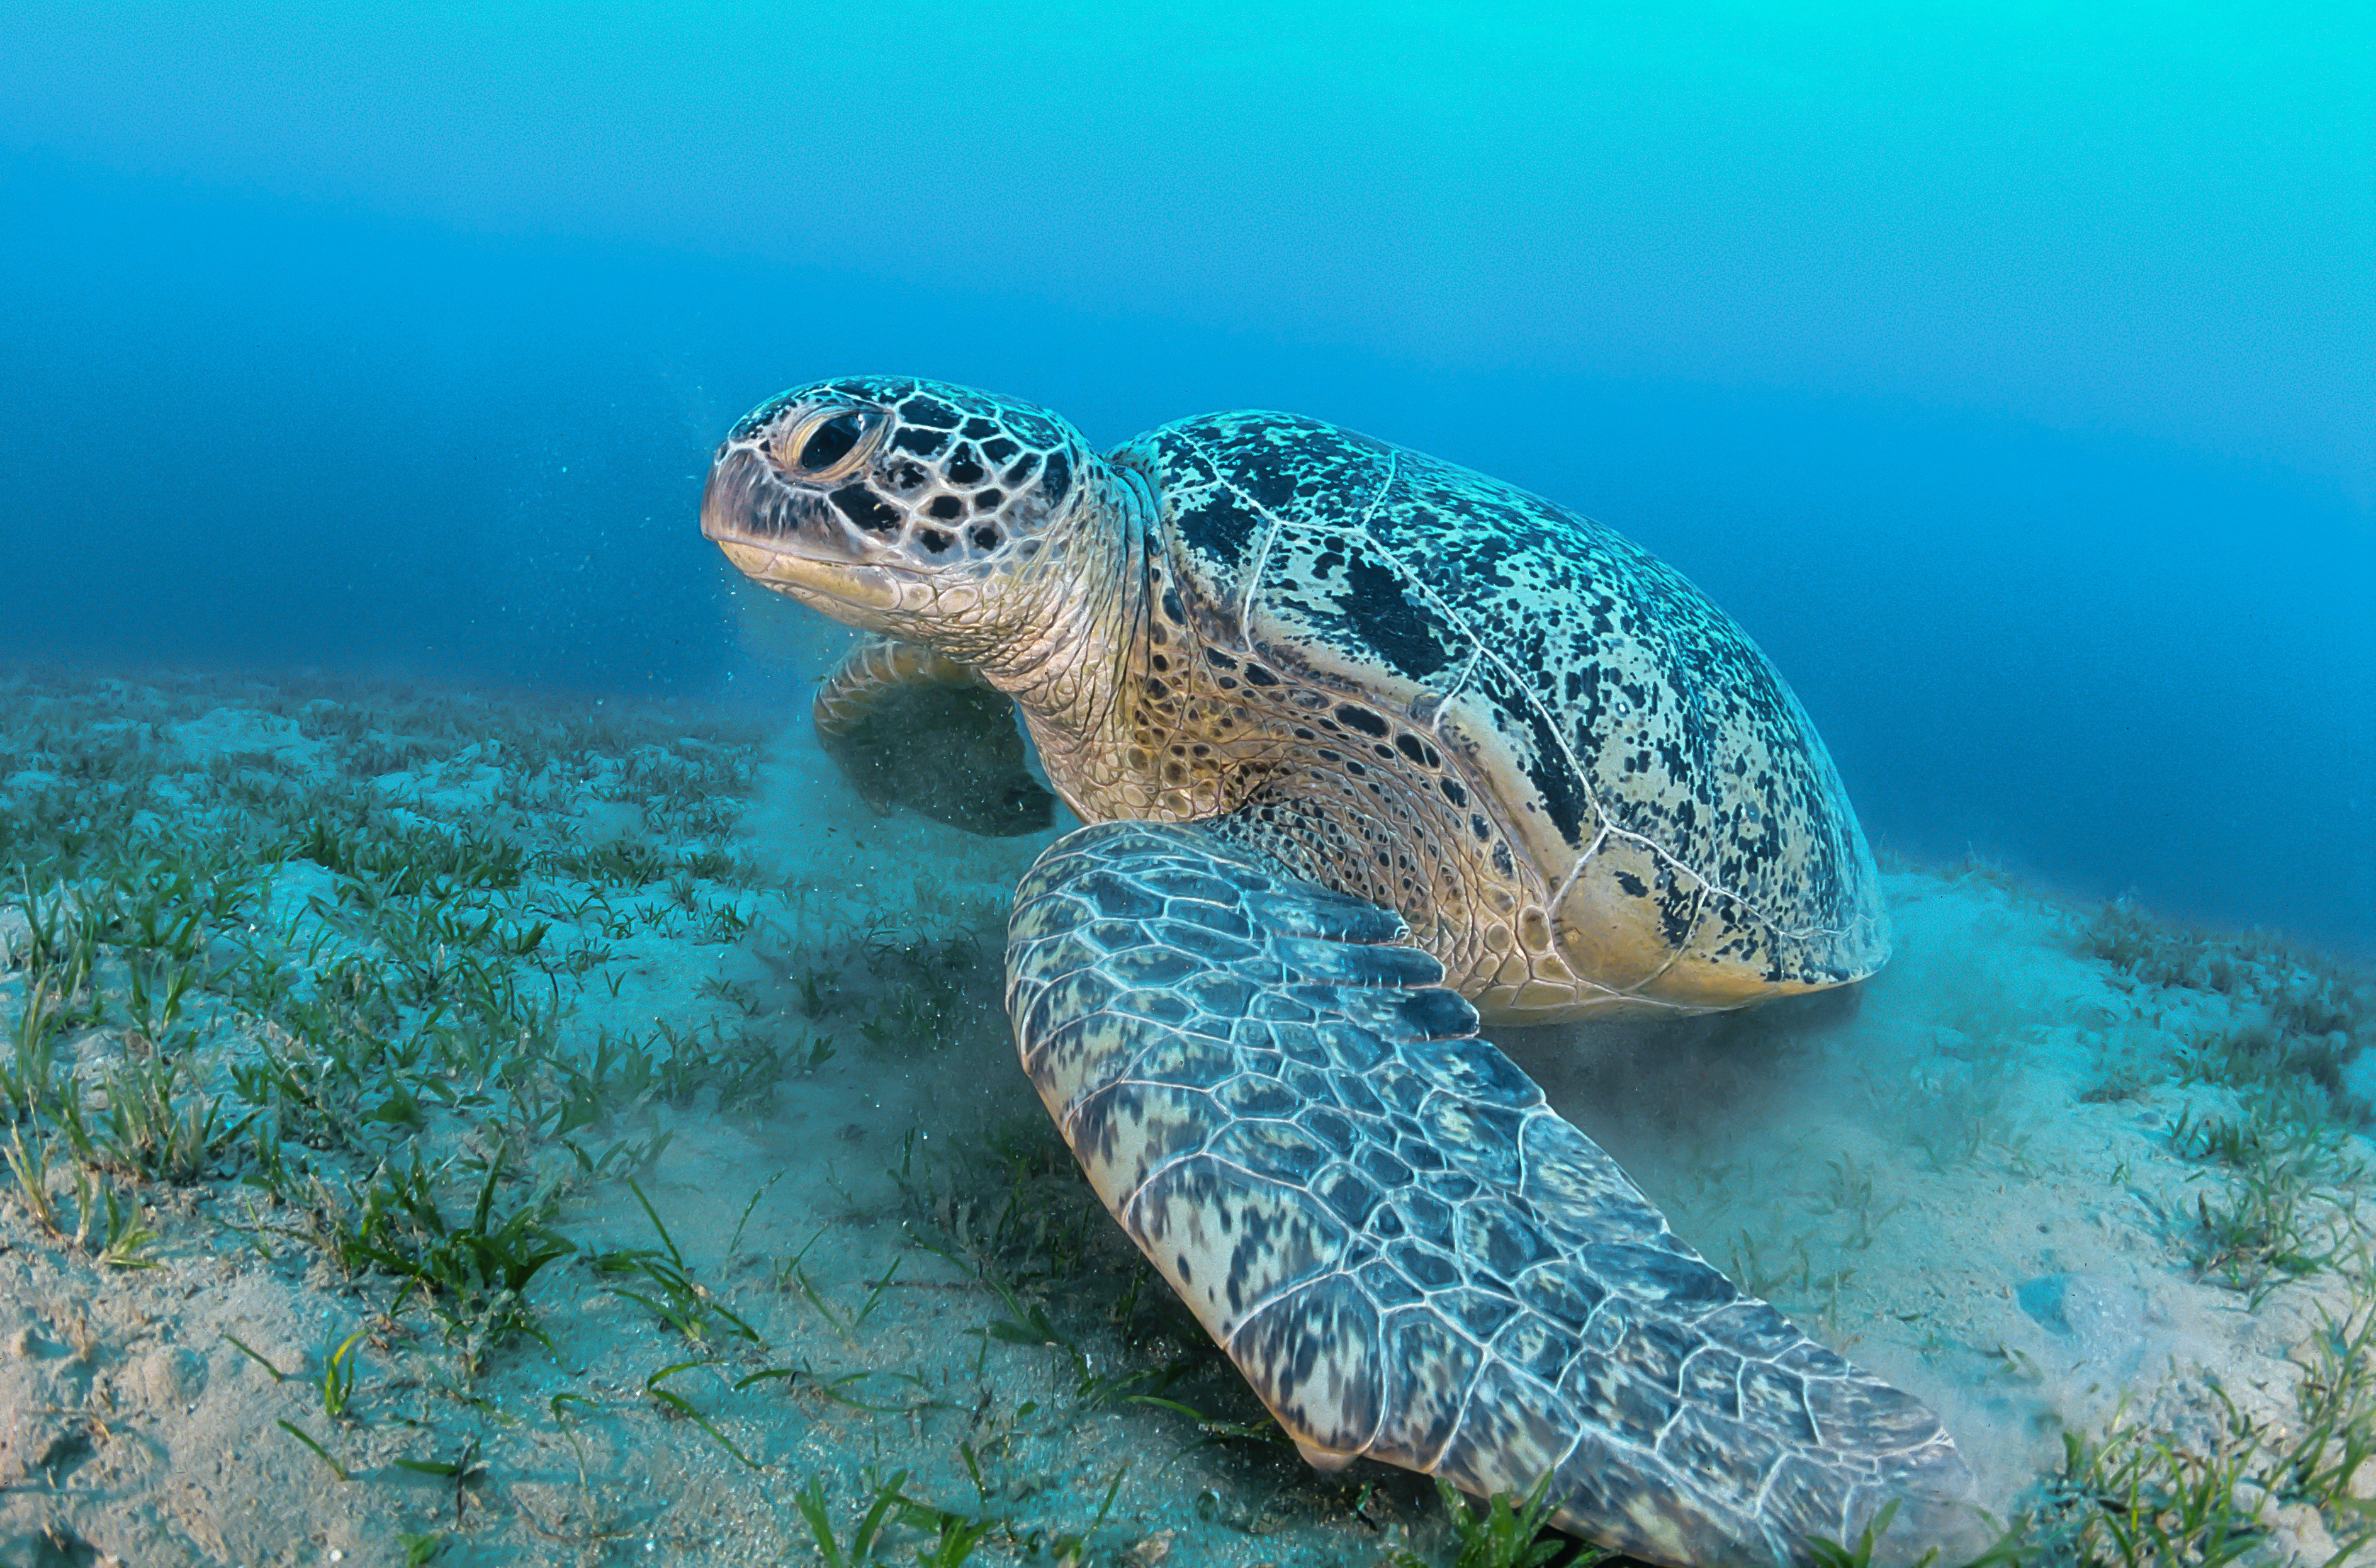 A huge green sea turtle feeds on sea grass in shallow water in the Red Sea, near Egypt, on April 21, 2020. Here’s a history of the words turtle, tortoise and terrapin ahead of World Turtle Day. Photo: Getty Images